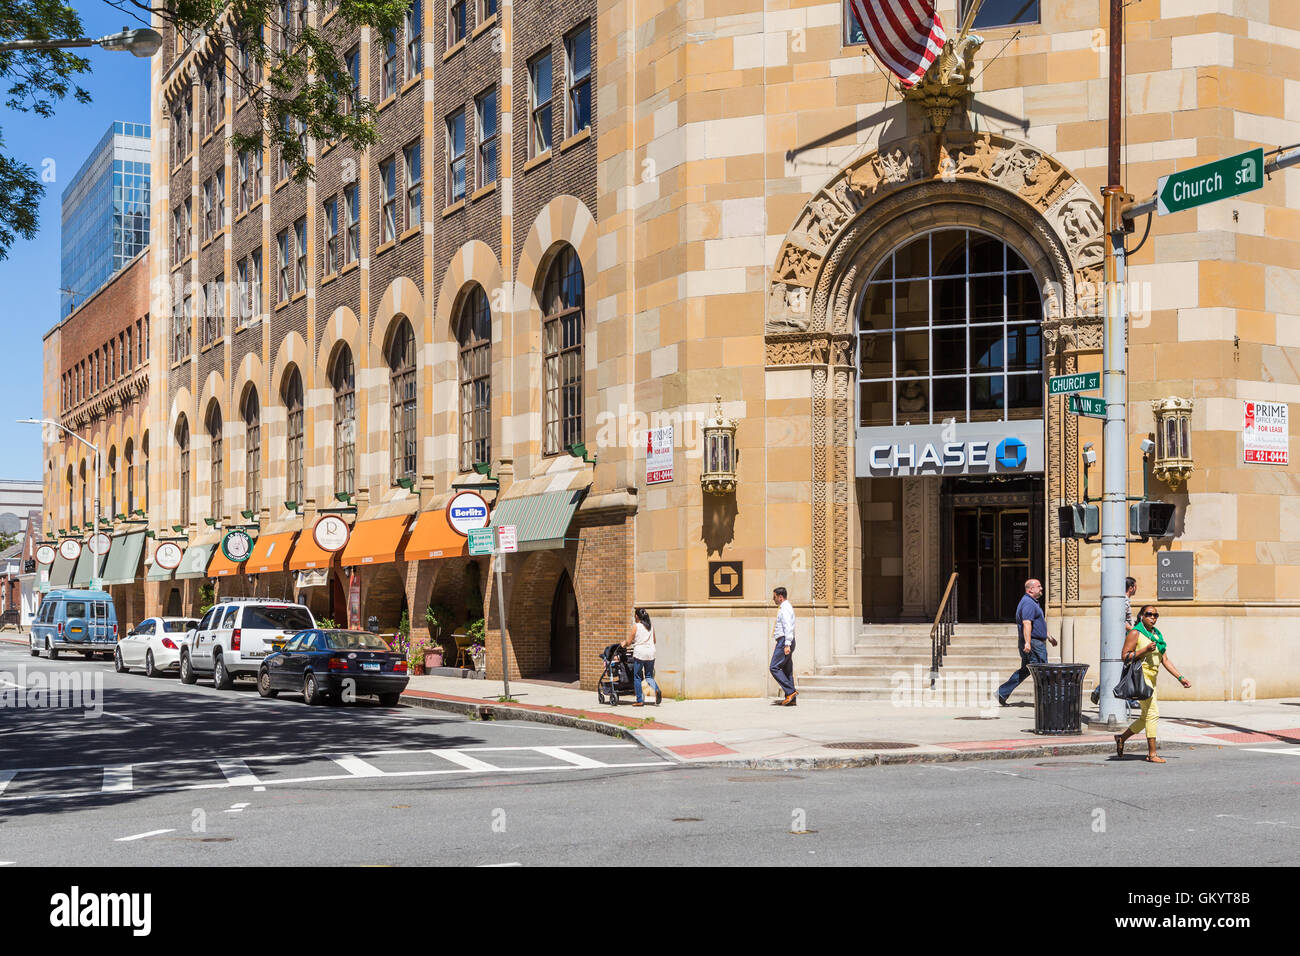 A Chase Bank branch and shops along Church Street occupy the historic Lawyers Building in downtown White Plains, New York. Stock Photo